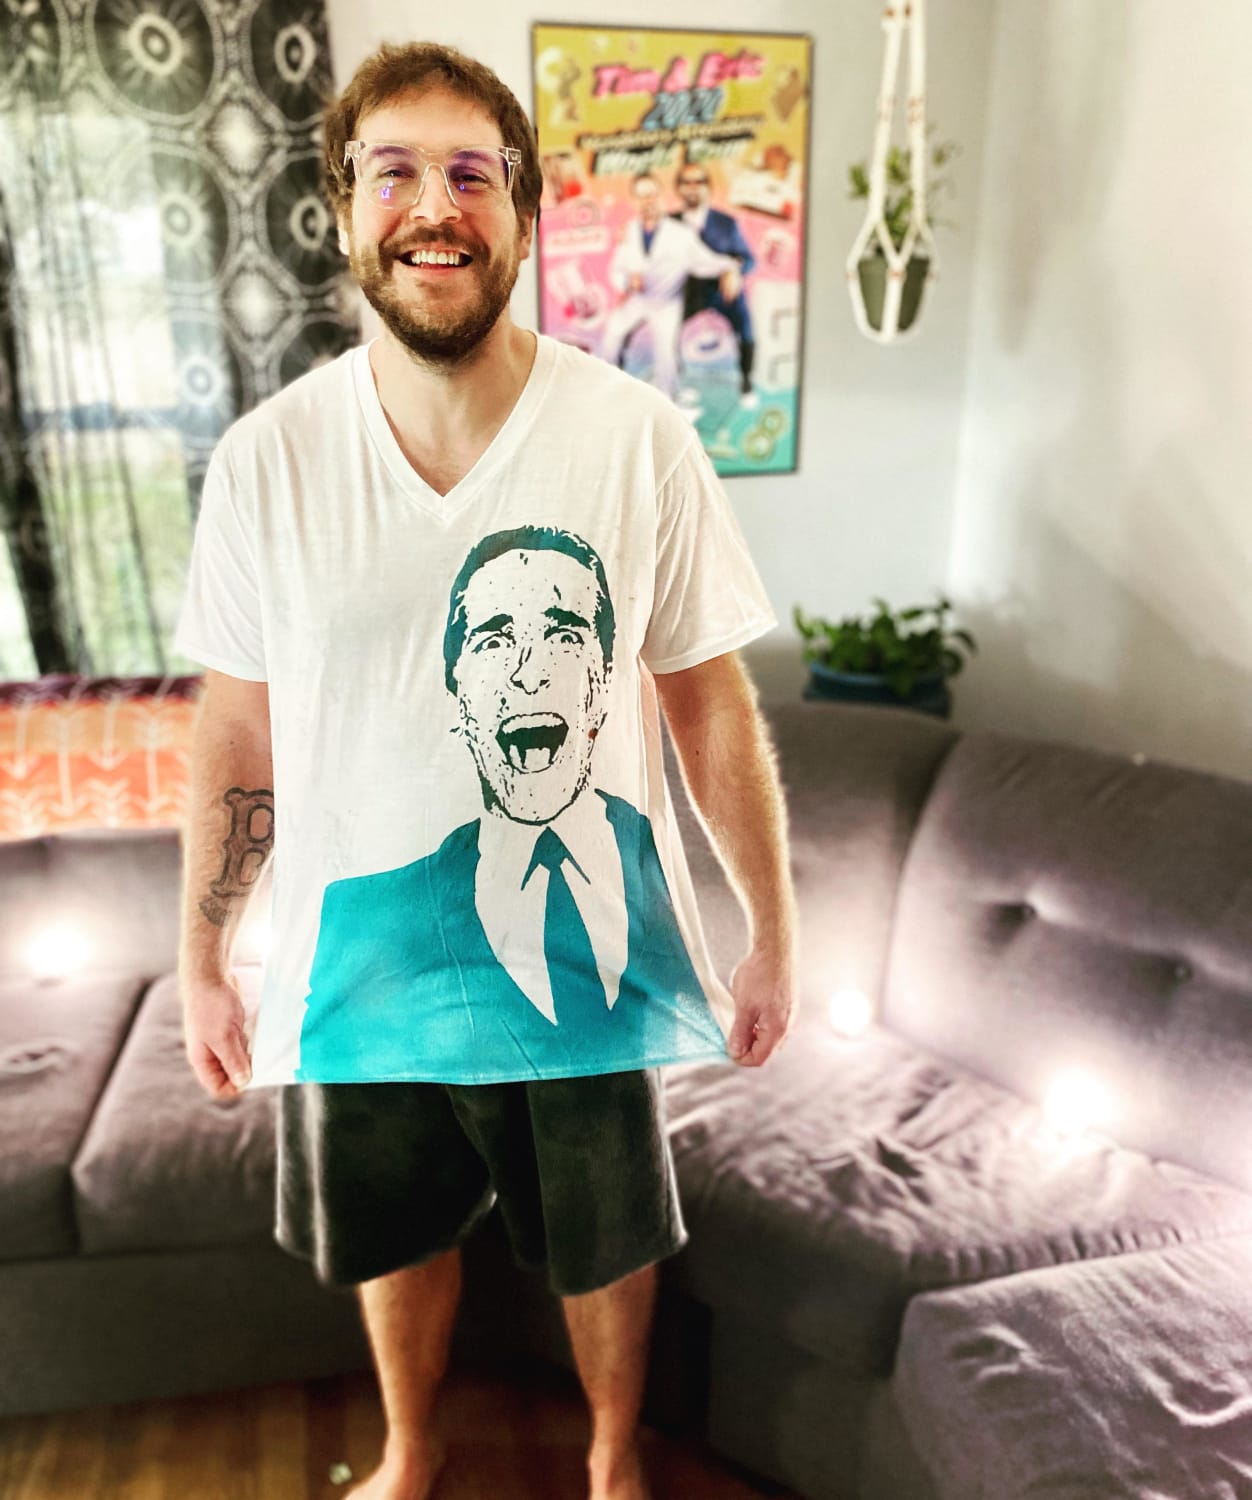 I hand cut a stencil and spray painted it on a shirt! Any American Psycho fans?